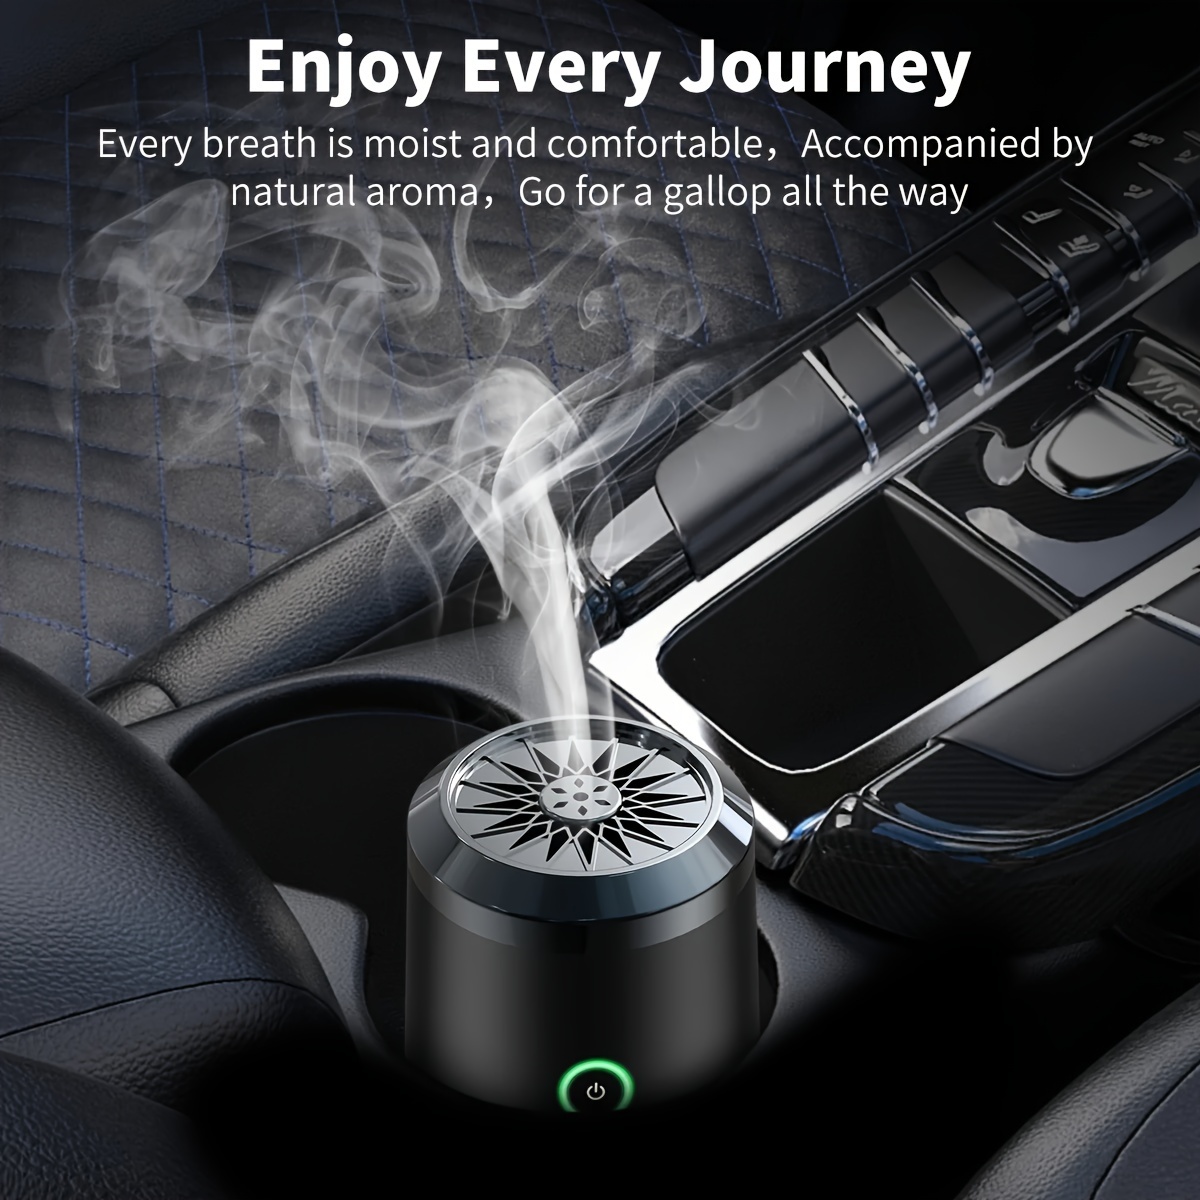 

Car Fragrance Diffuser, Portable Metal Incense Burner, Usb Compatible, Essential Oil Fragrance For Vehicle And Home Use